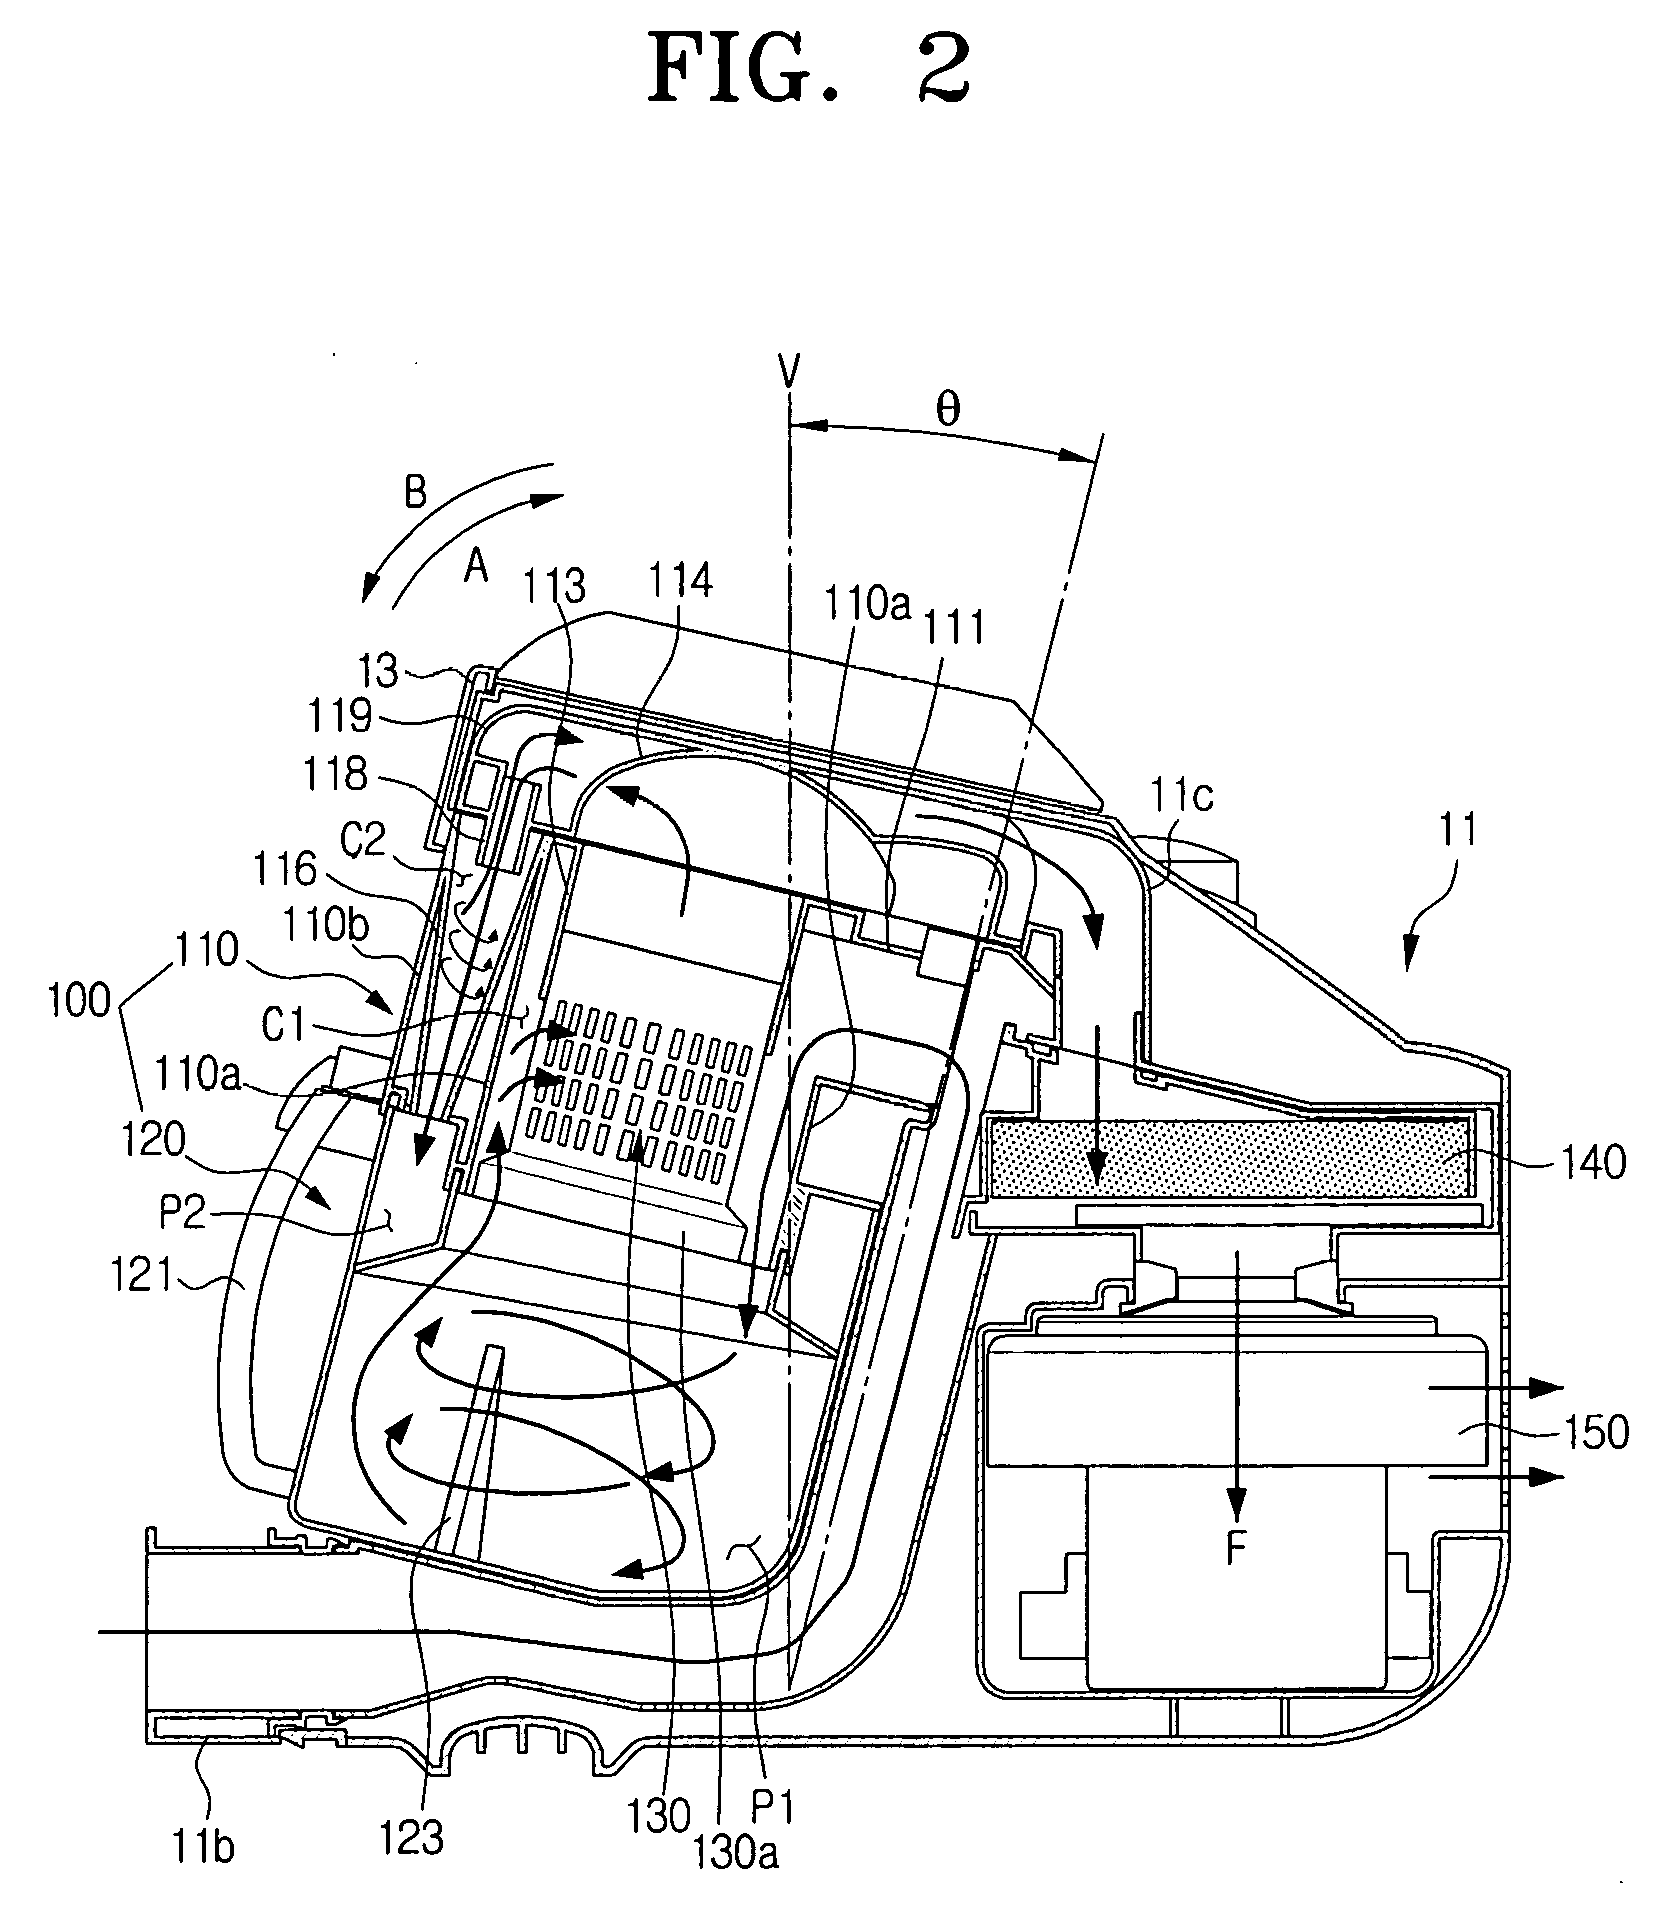 Vacuum cleaner having a cyclone dust collecting apparatus